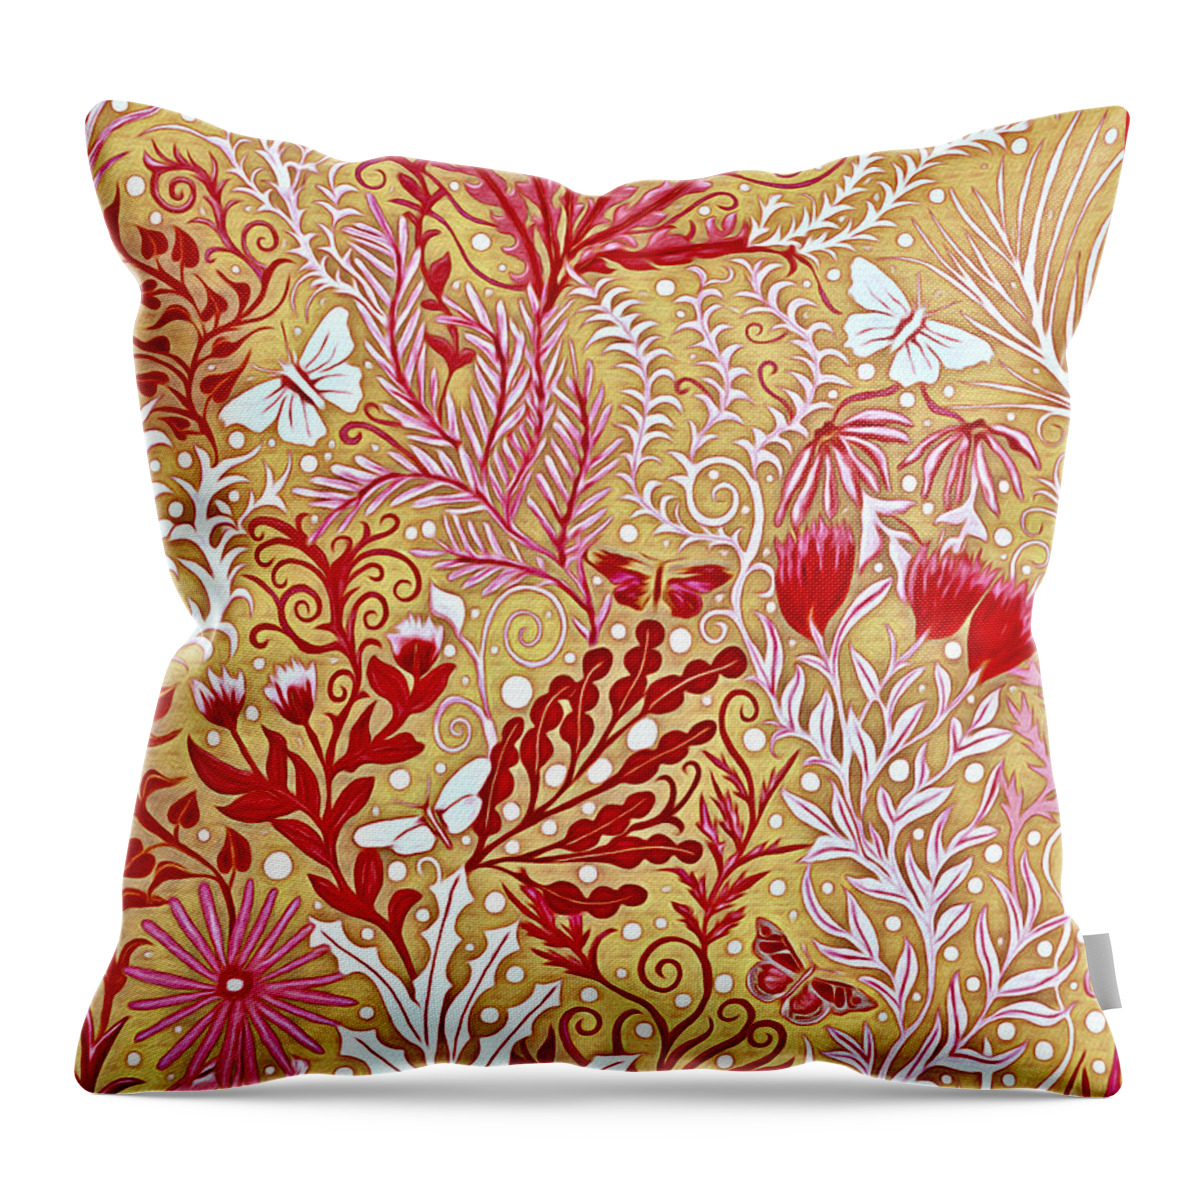 Lise Winne Throw Pillow featuring the mixed media Tapestry Design with red and pink on a gold background by Lise Winne